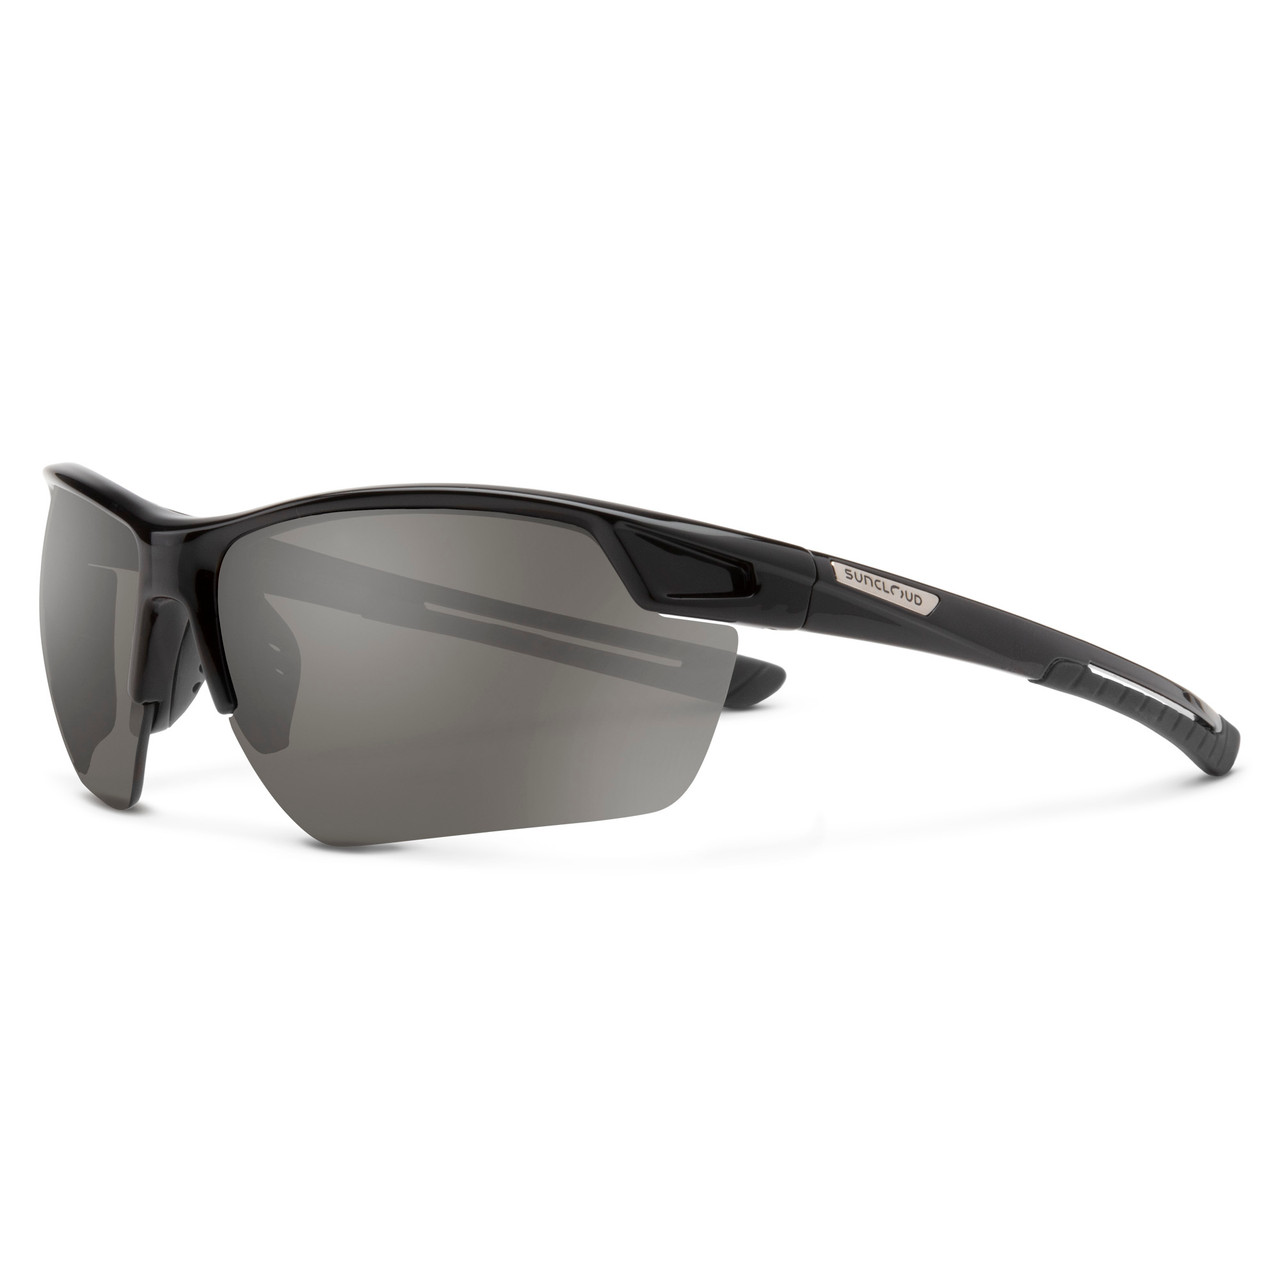 Suncloud Contender Polarized Sunglasses 8 COLORS TO CHOOSE FROM